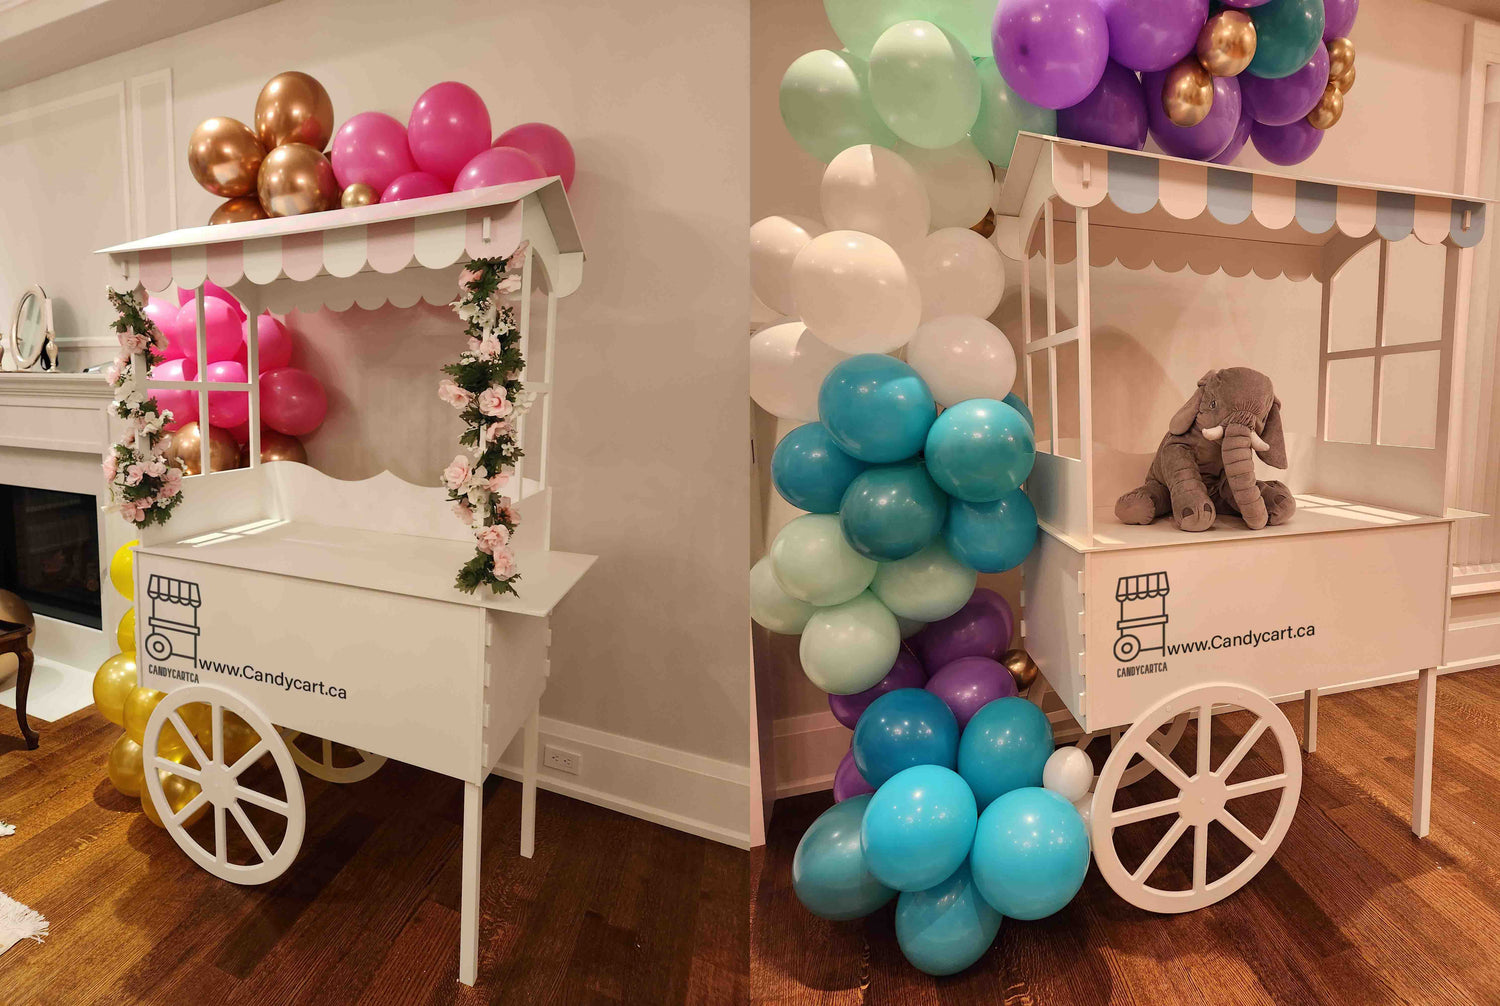 Candy Cart On Wheels for sale, Simple column Candy Cart, Fantasy Column Candy Cart, Small Candy Cart, Champagne Cart, Wedding Package, Donute Cart, Wooden Small Candy Cart, Wooden Candy Cart